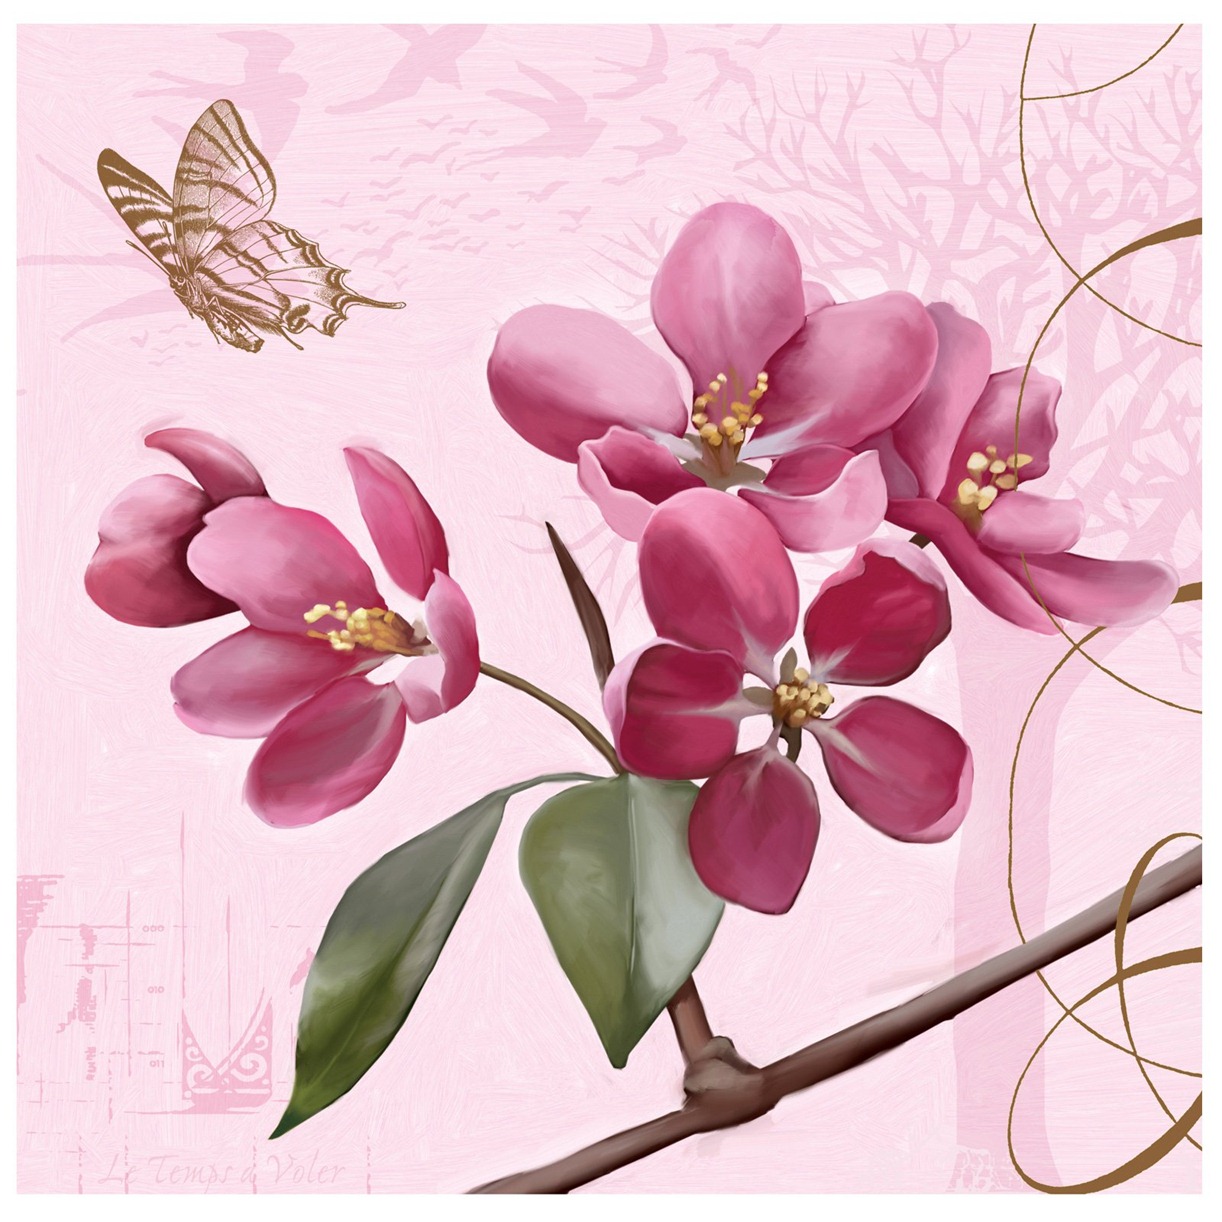 [Cherry%2520Blossom%2520with%2520Butterfly%255B289%255D.jpg]